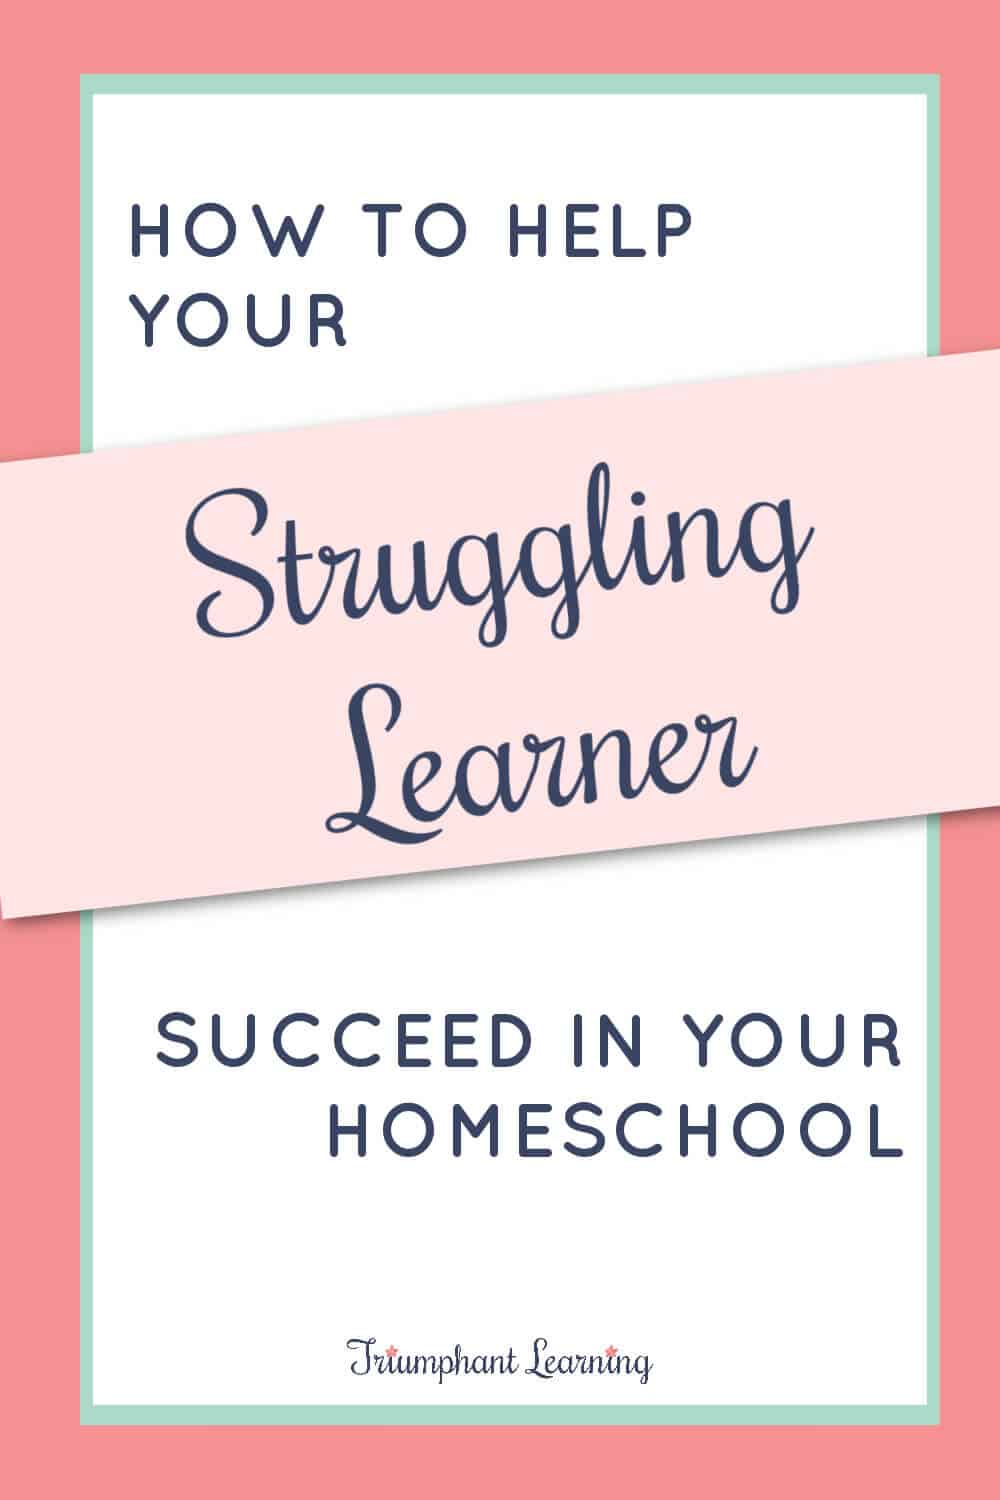 Many parents feel ill-equipped to teach their struggling learner. Learn the three questions you need to answer to help your struggling learner succeed. via @TriLearning